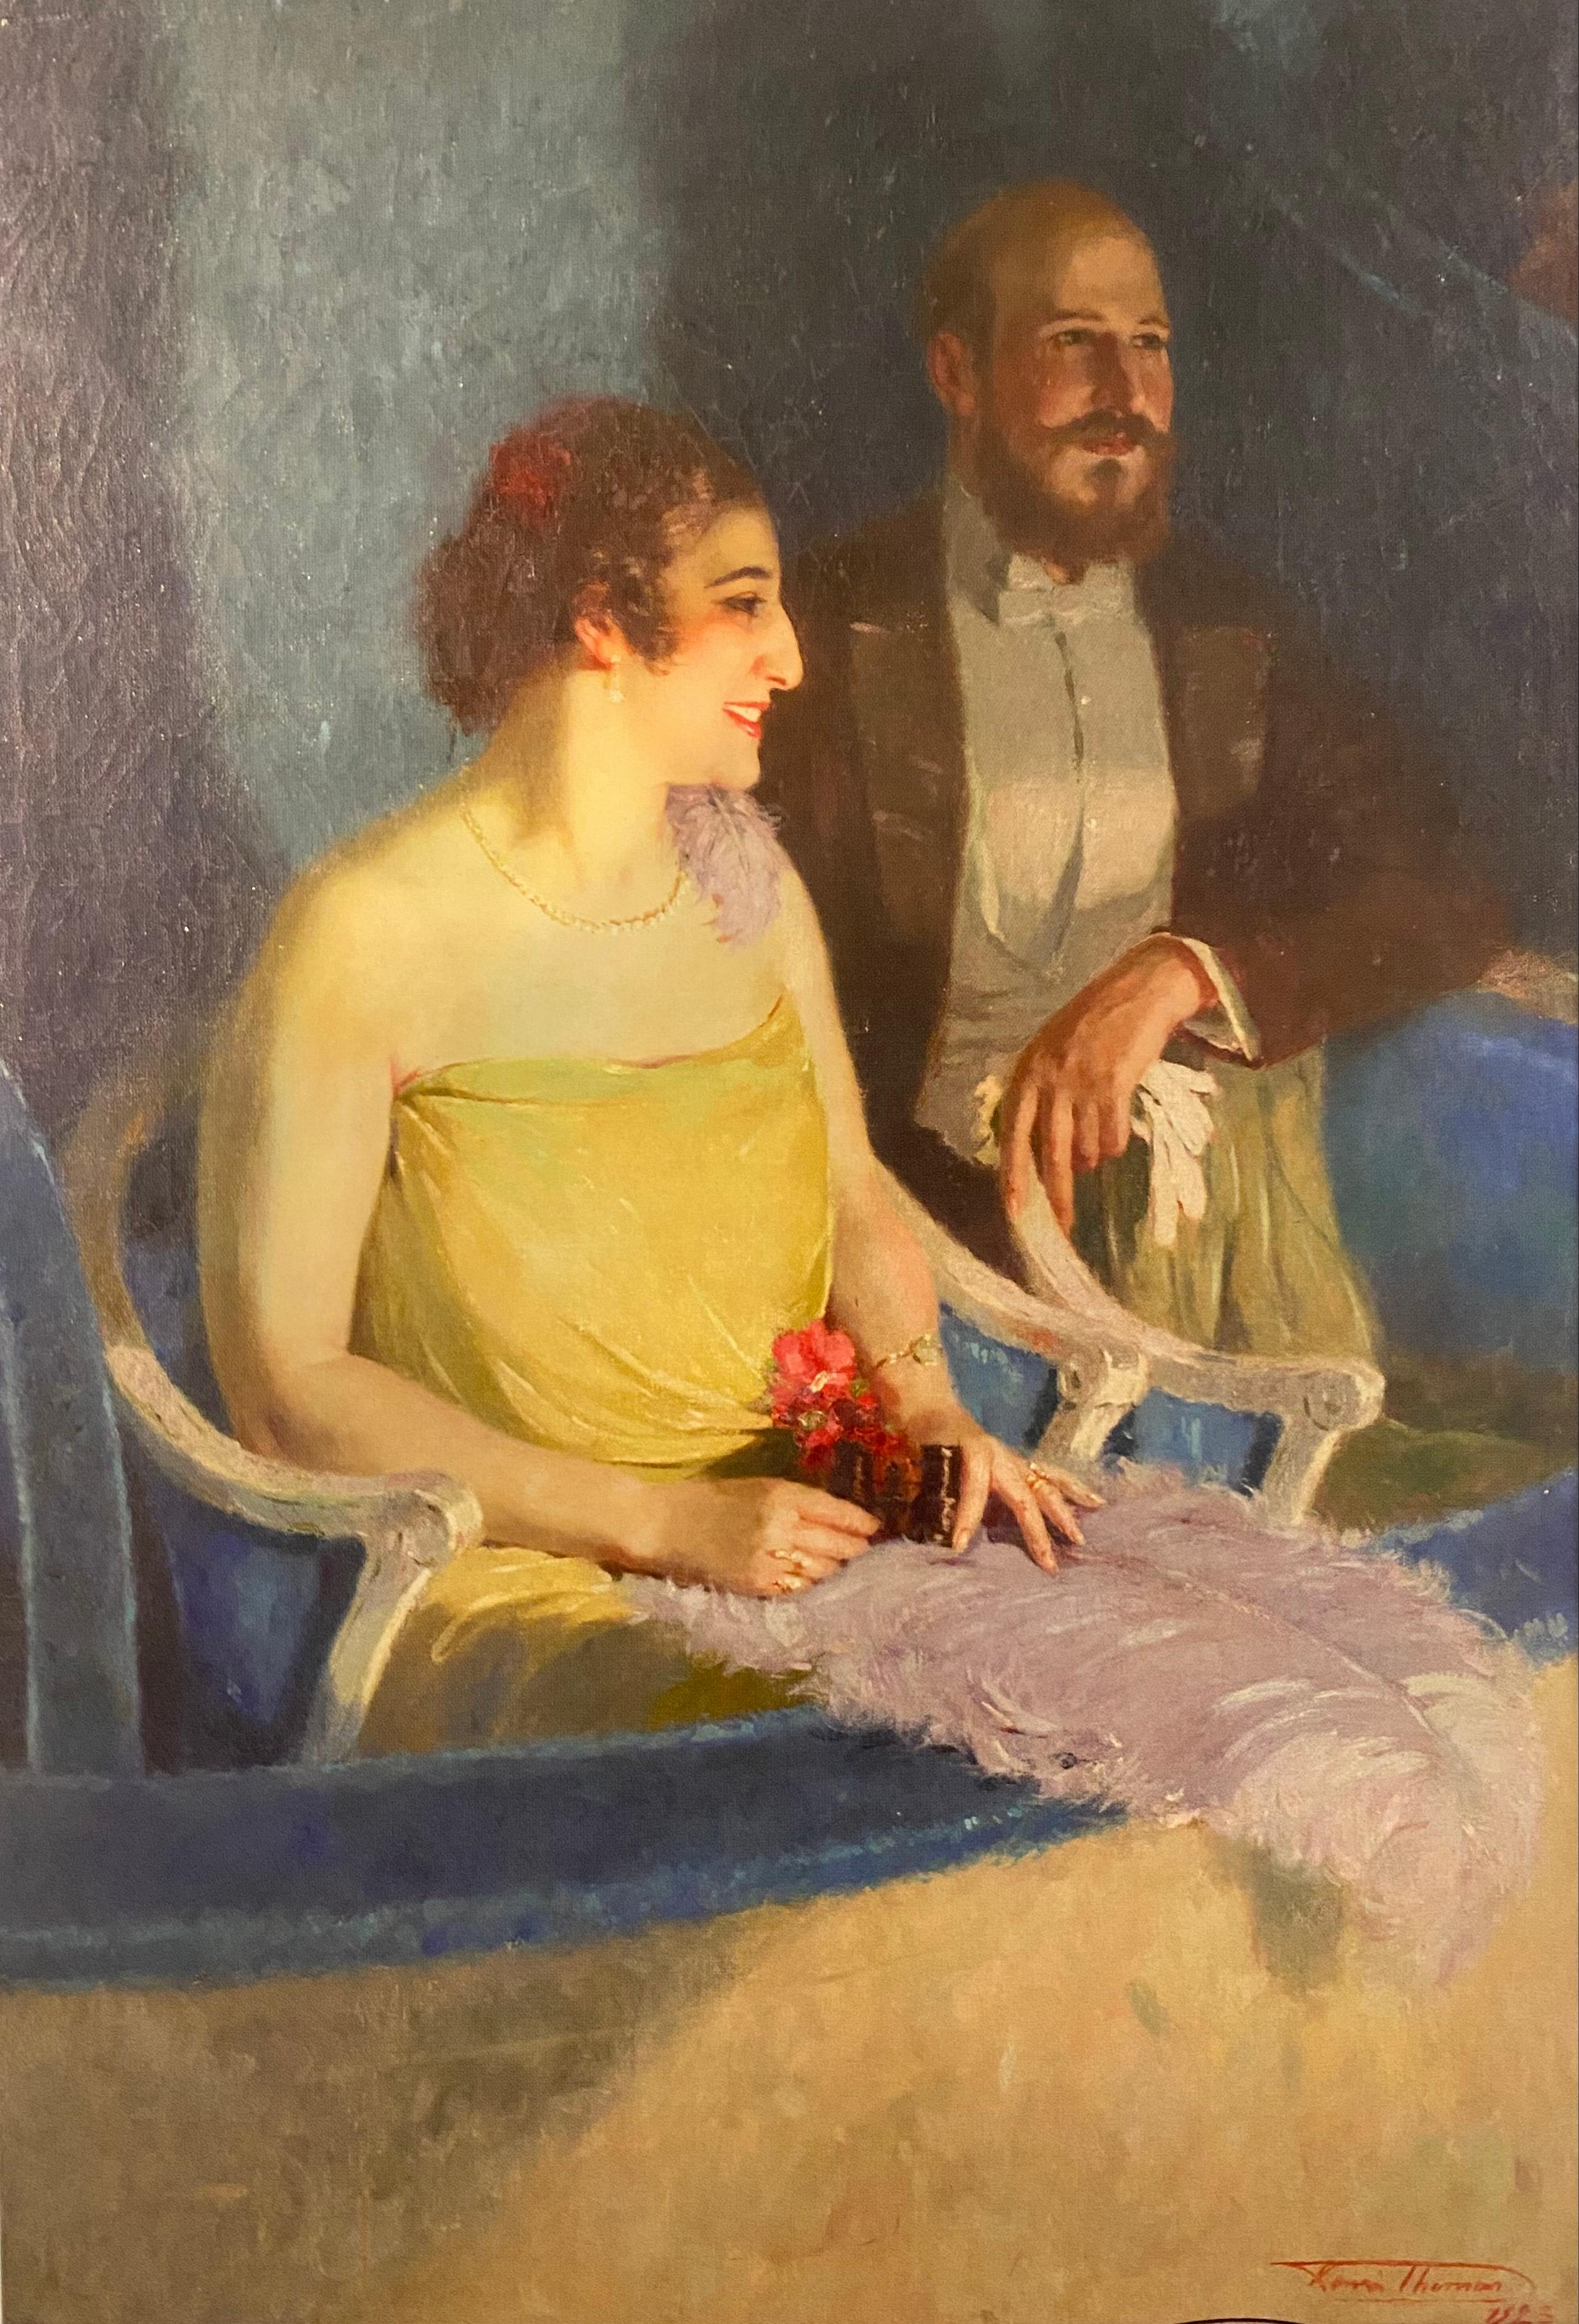 Large canvas representing a couple in their dressing room at the theatre. Very beautiful and elegant genre scene by Henri Joseph Thomas. 
Henri Joseph Thomas (1878-1972) was a Belgian genre, portrait and still life painter, sculptor and printmaker